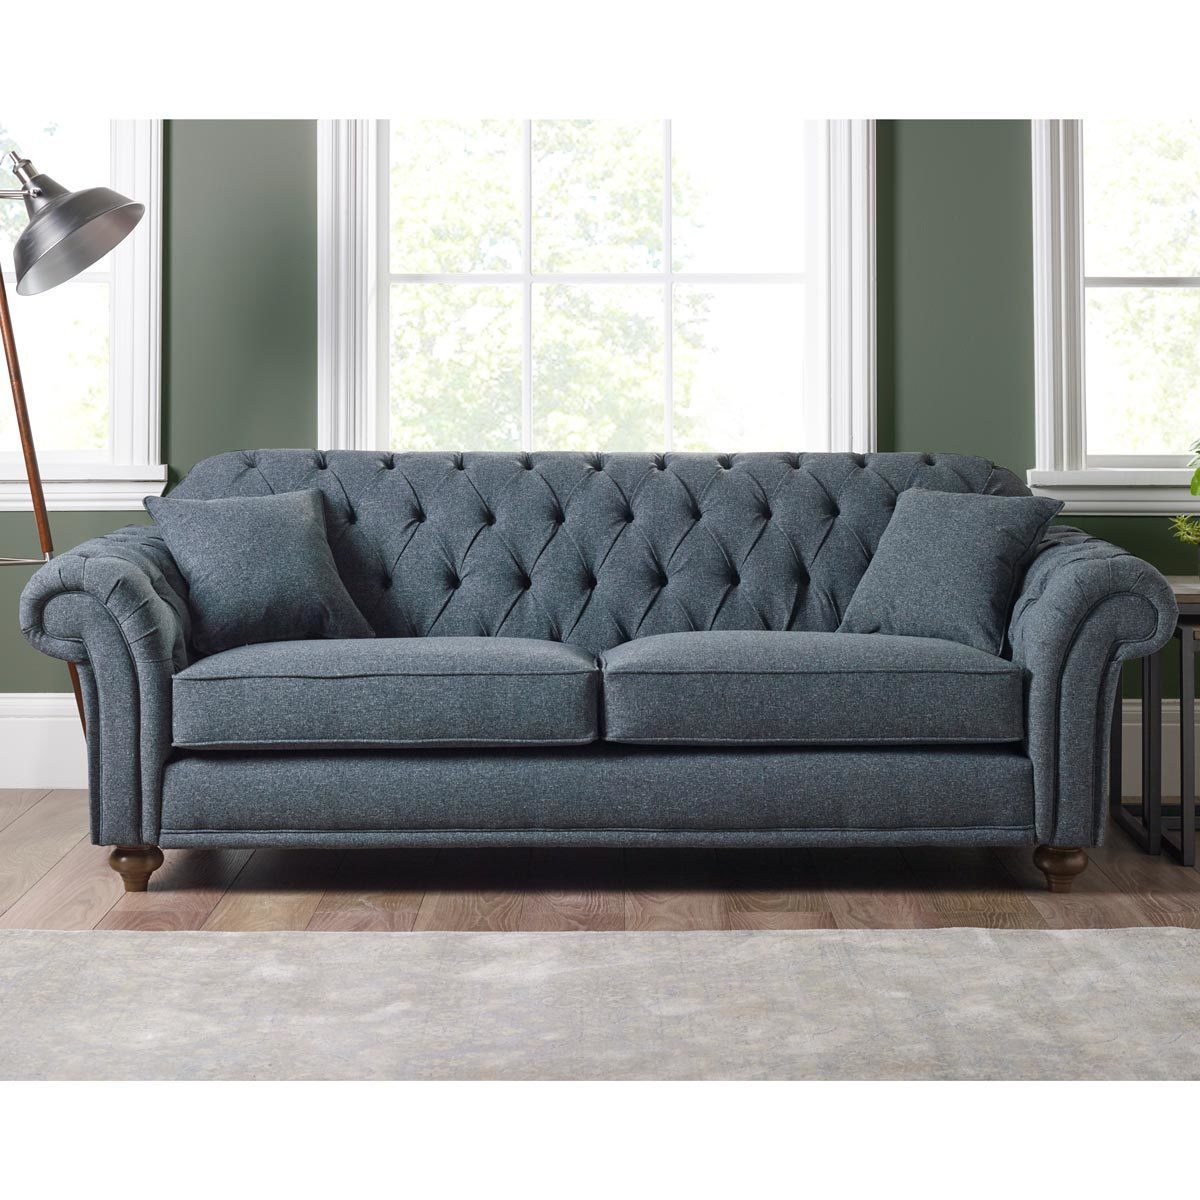 Bordeaux Button Back 4 Seater Fabric Sofa, Grey - Signature Retail Stores